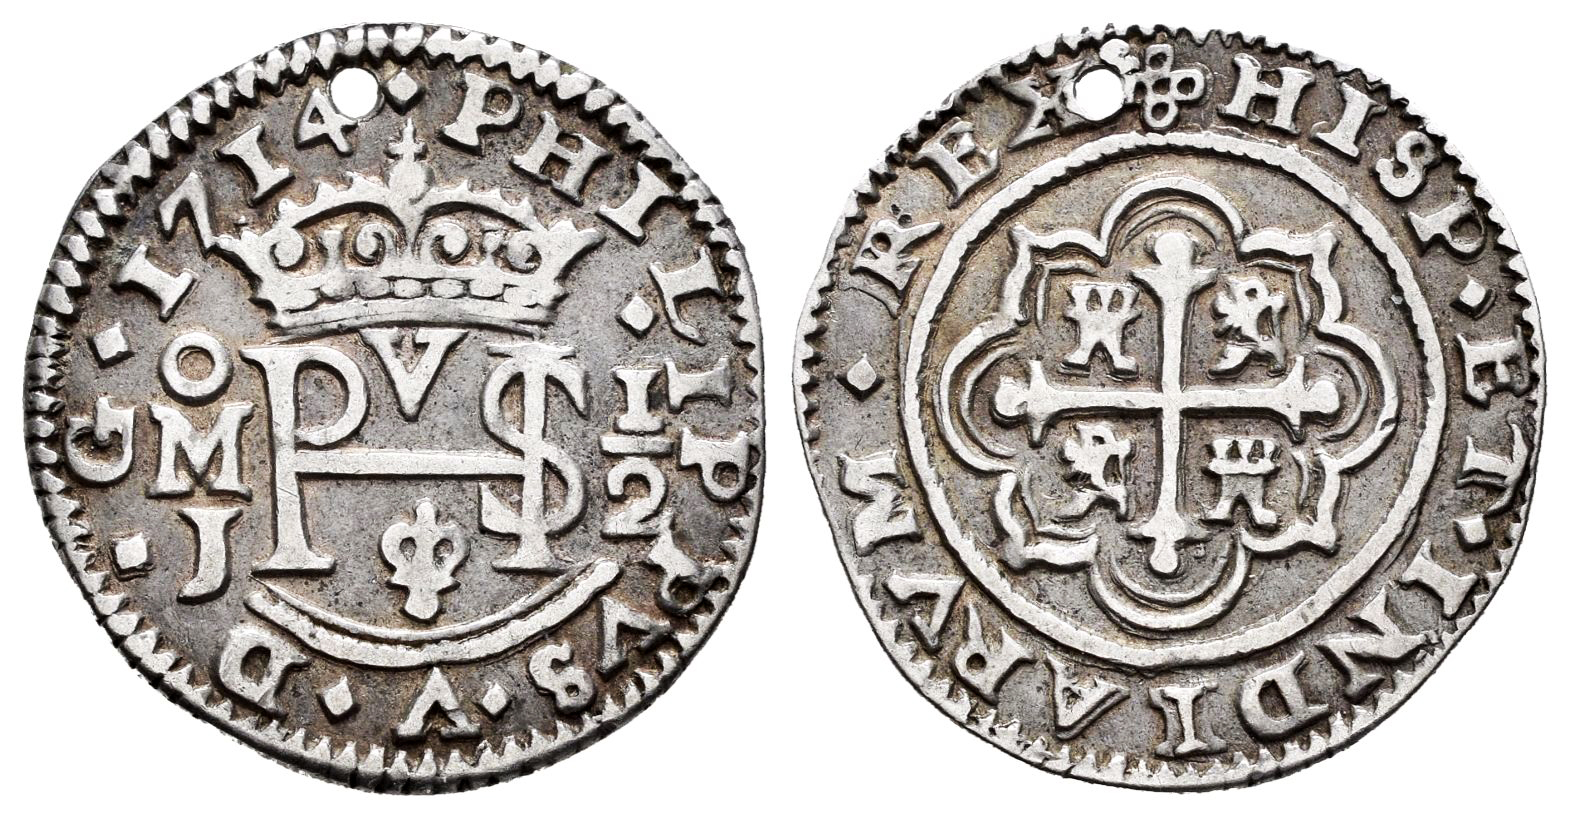 Philip V (1700-1746). 1/2 real. 1714. México. Images courtesy Tauler and Fau Auction